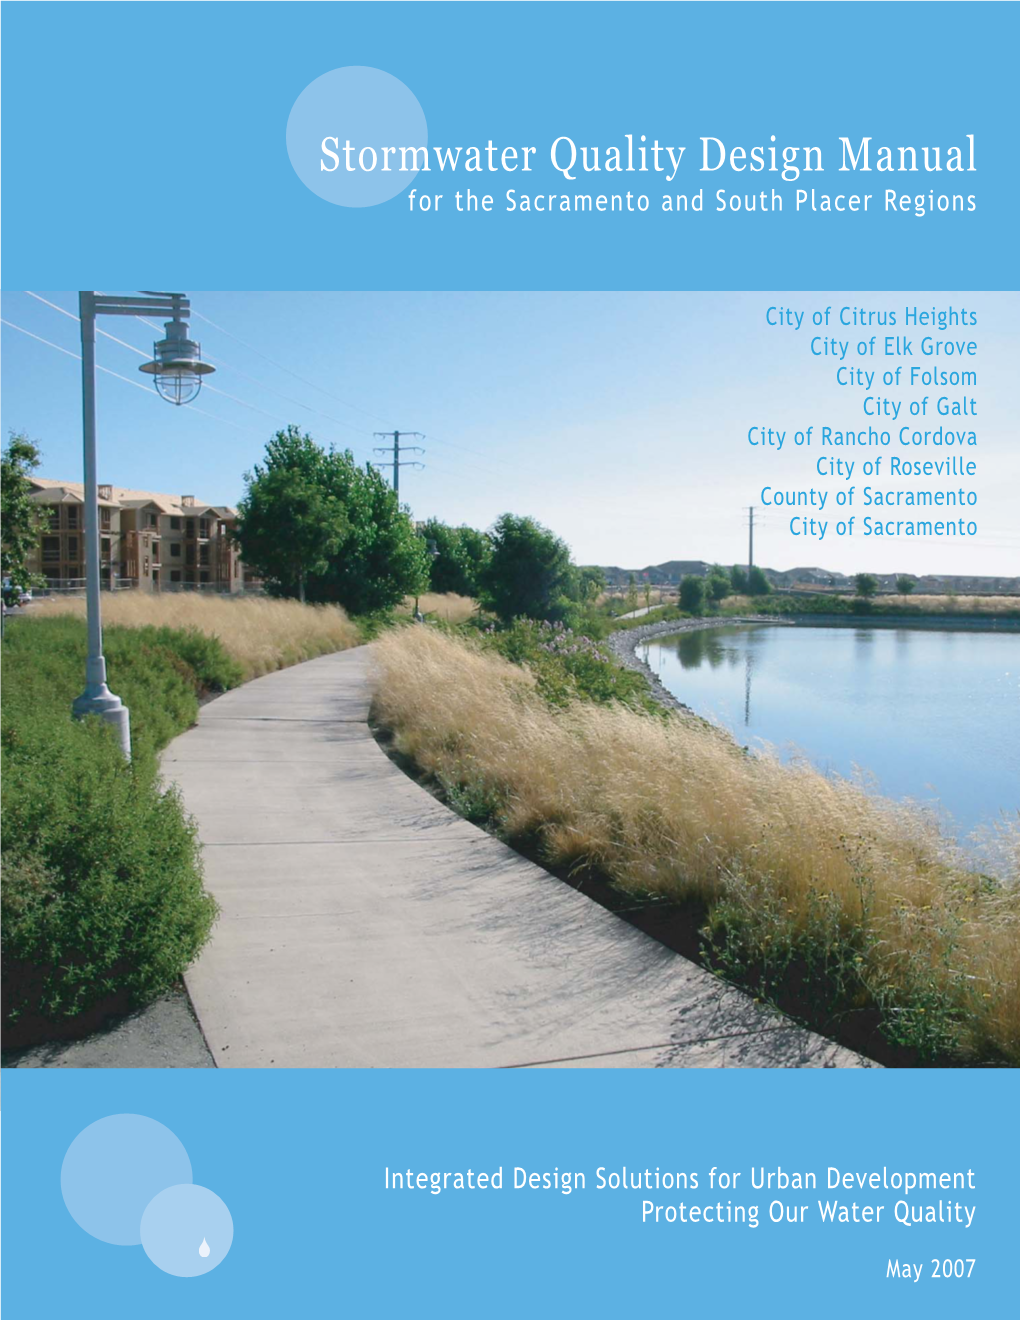 Stormwater Quality Design Manual for the Sacramento and South Placer Regions